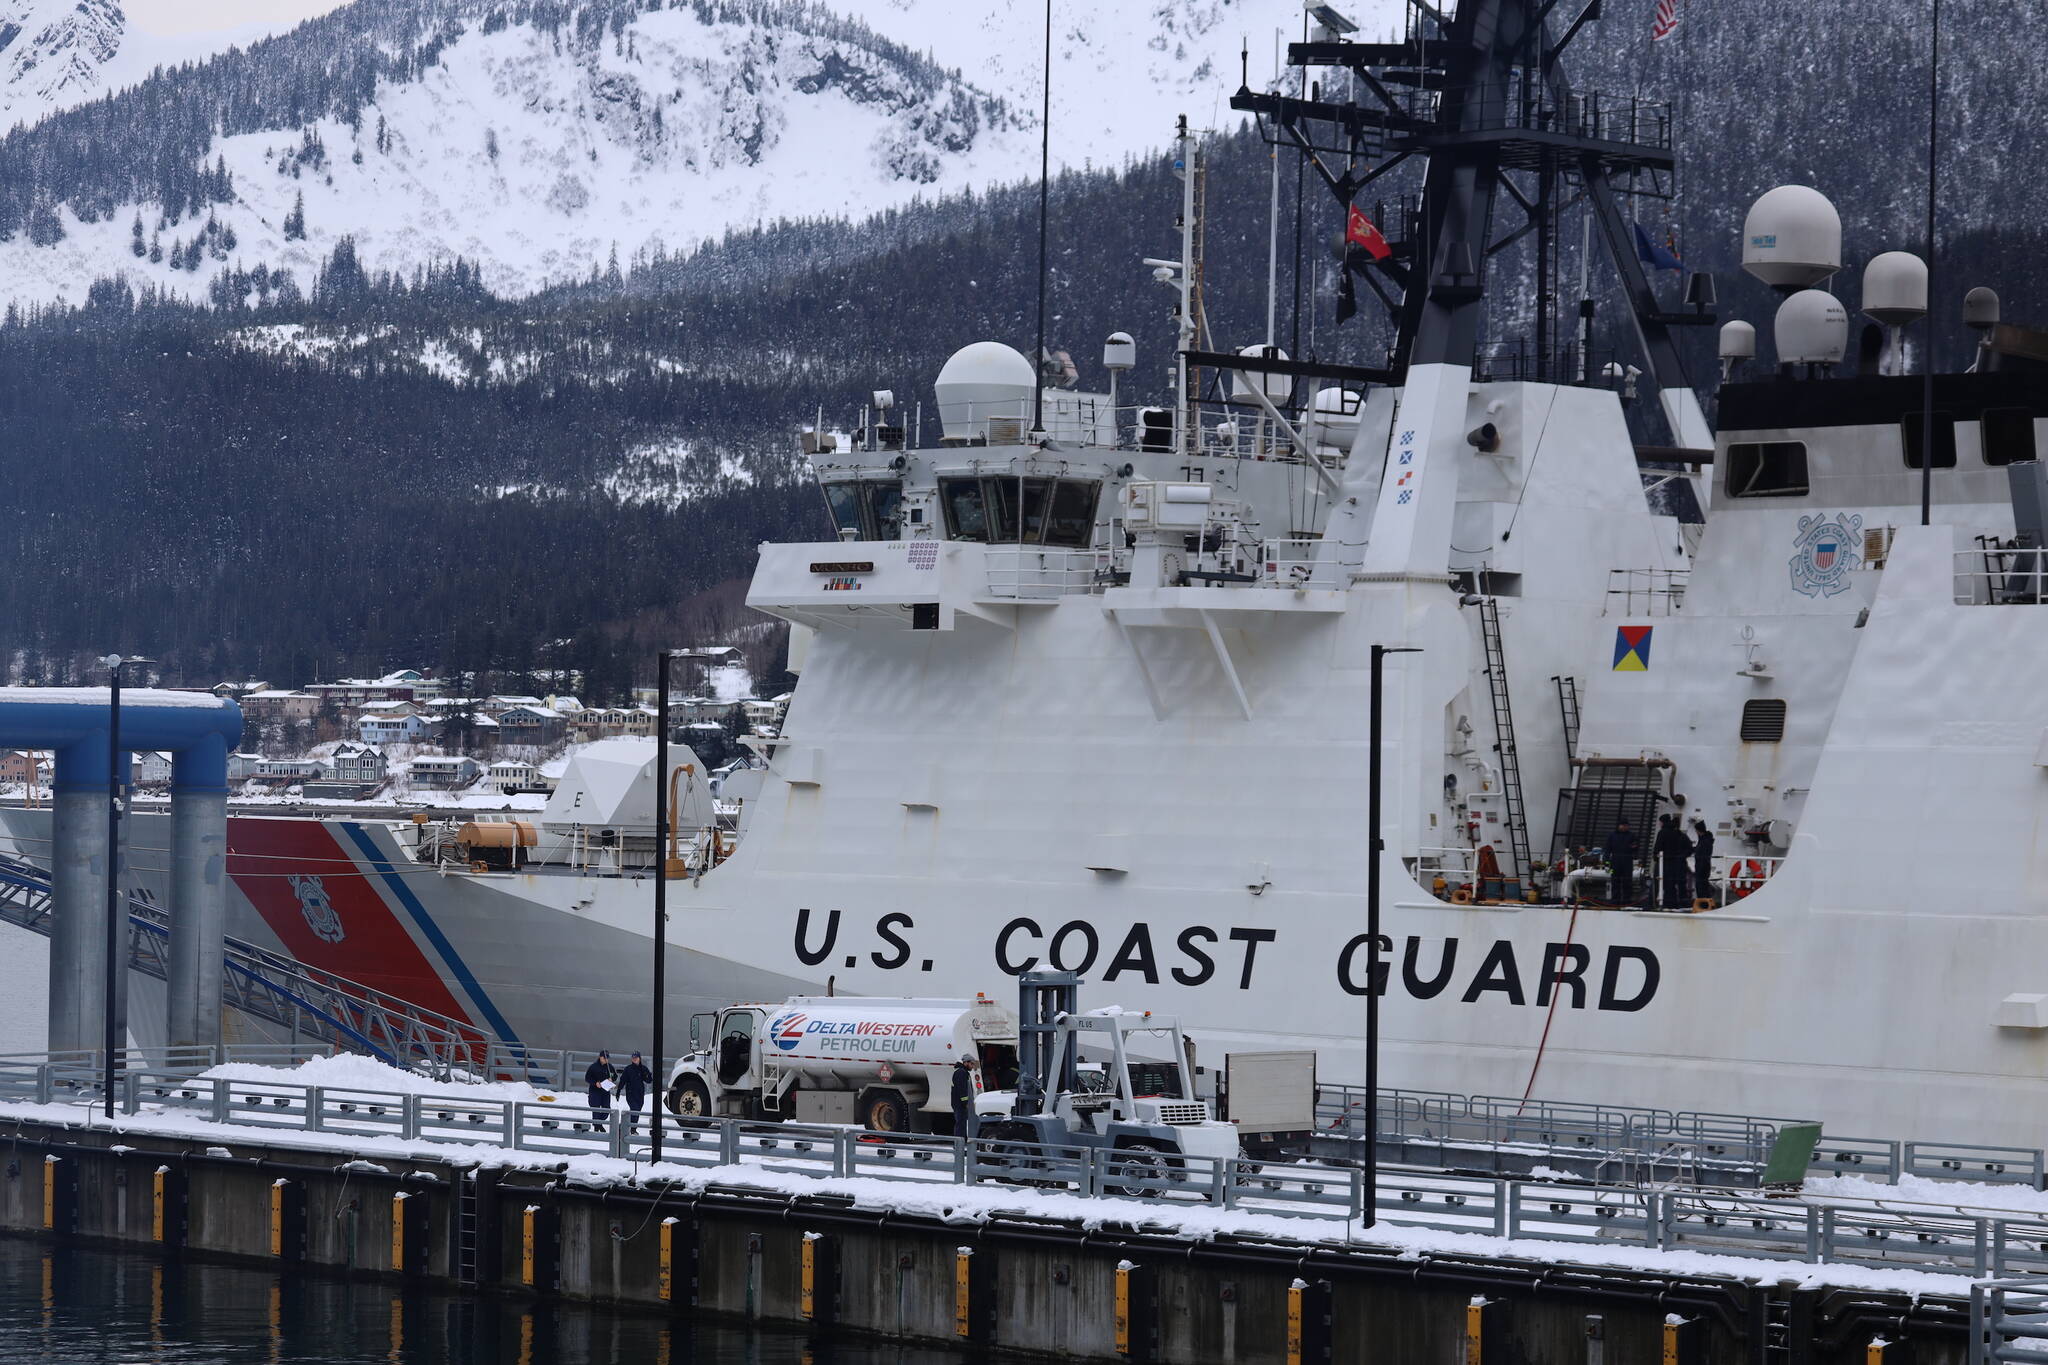 Coast Guard Cutter Munro docks in Juneau for a scheduled port visit Monday. The port visit marks Munro’s final stop before returning to its homeport in Alameda, California after 11,500 miles and 105 days away from homeport. (Clarise Larson / Juneau Empire)